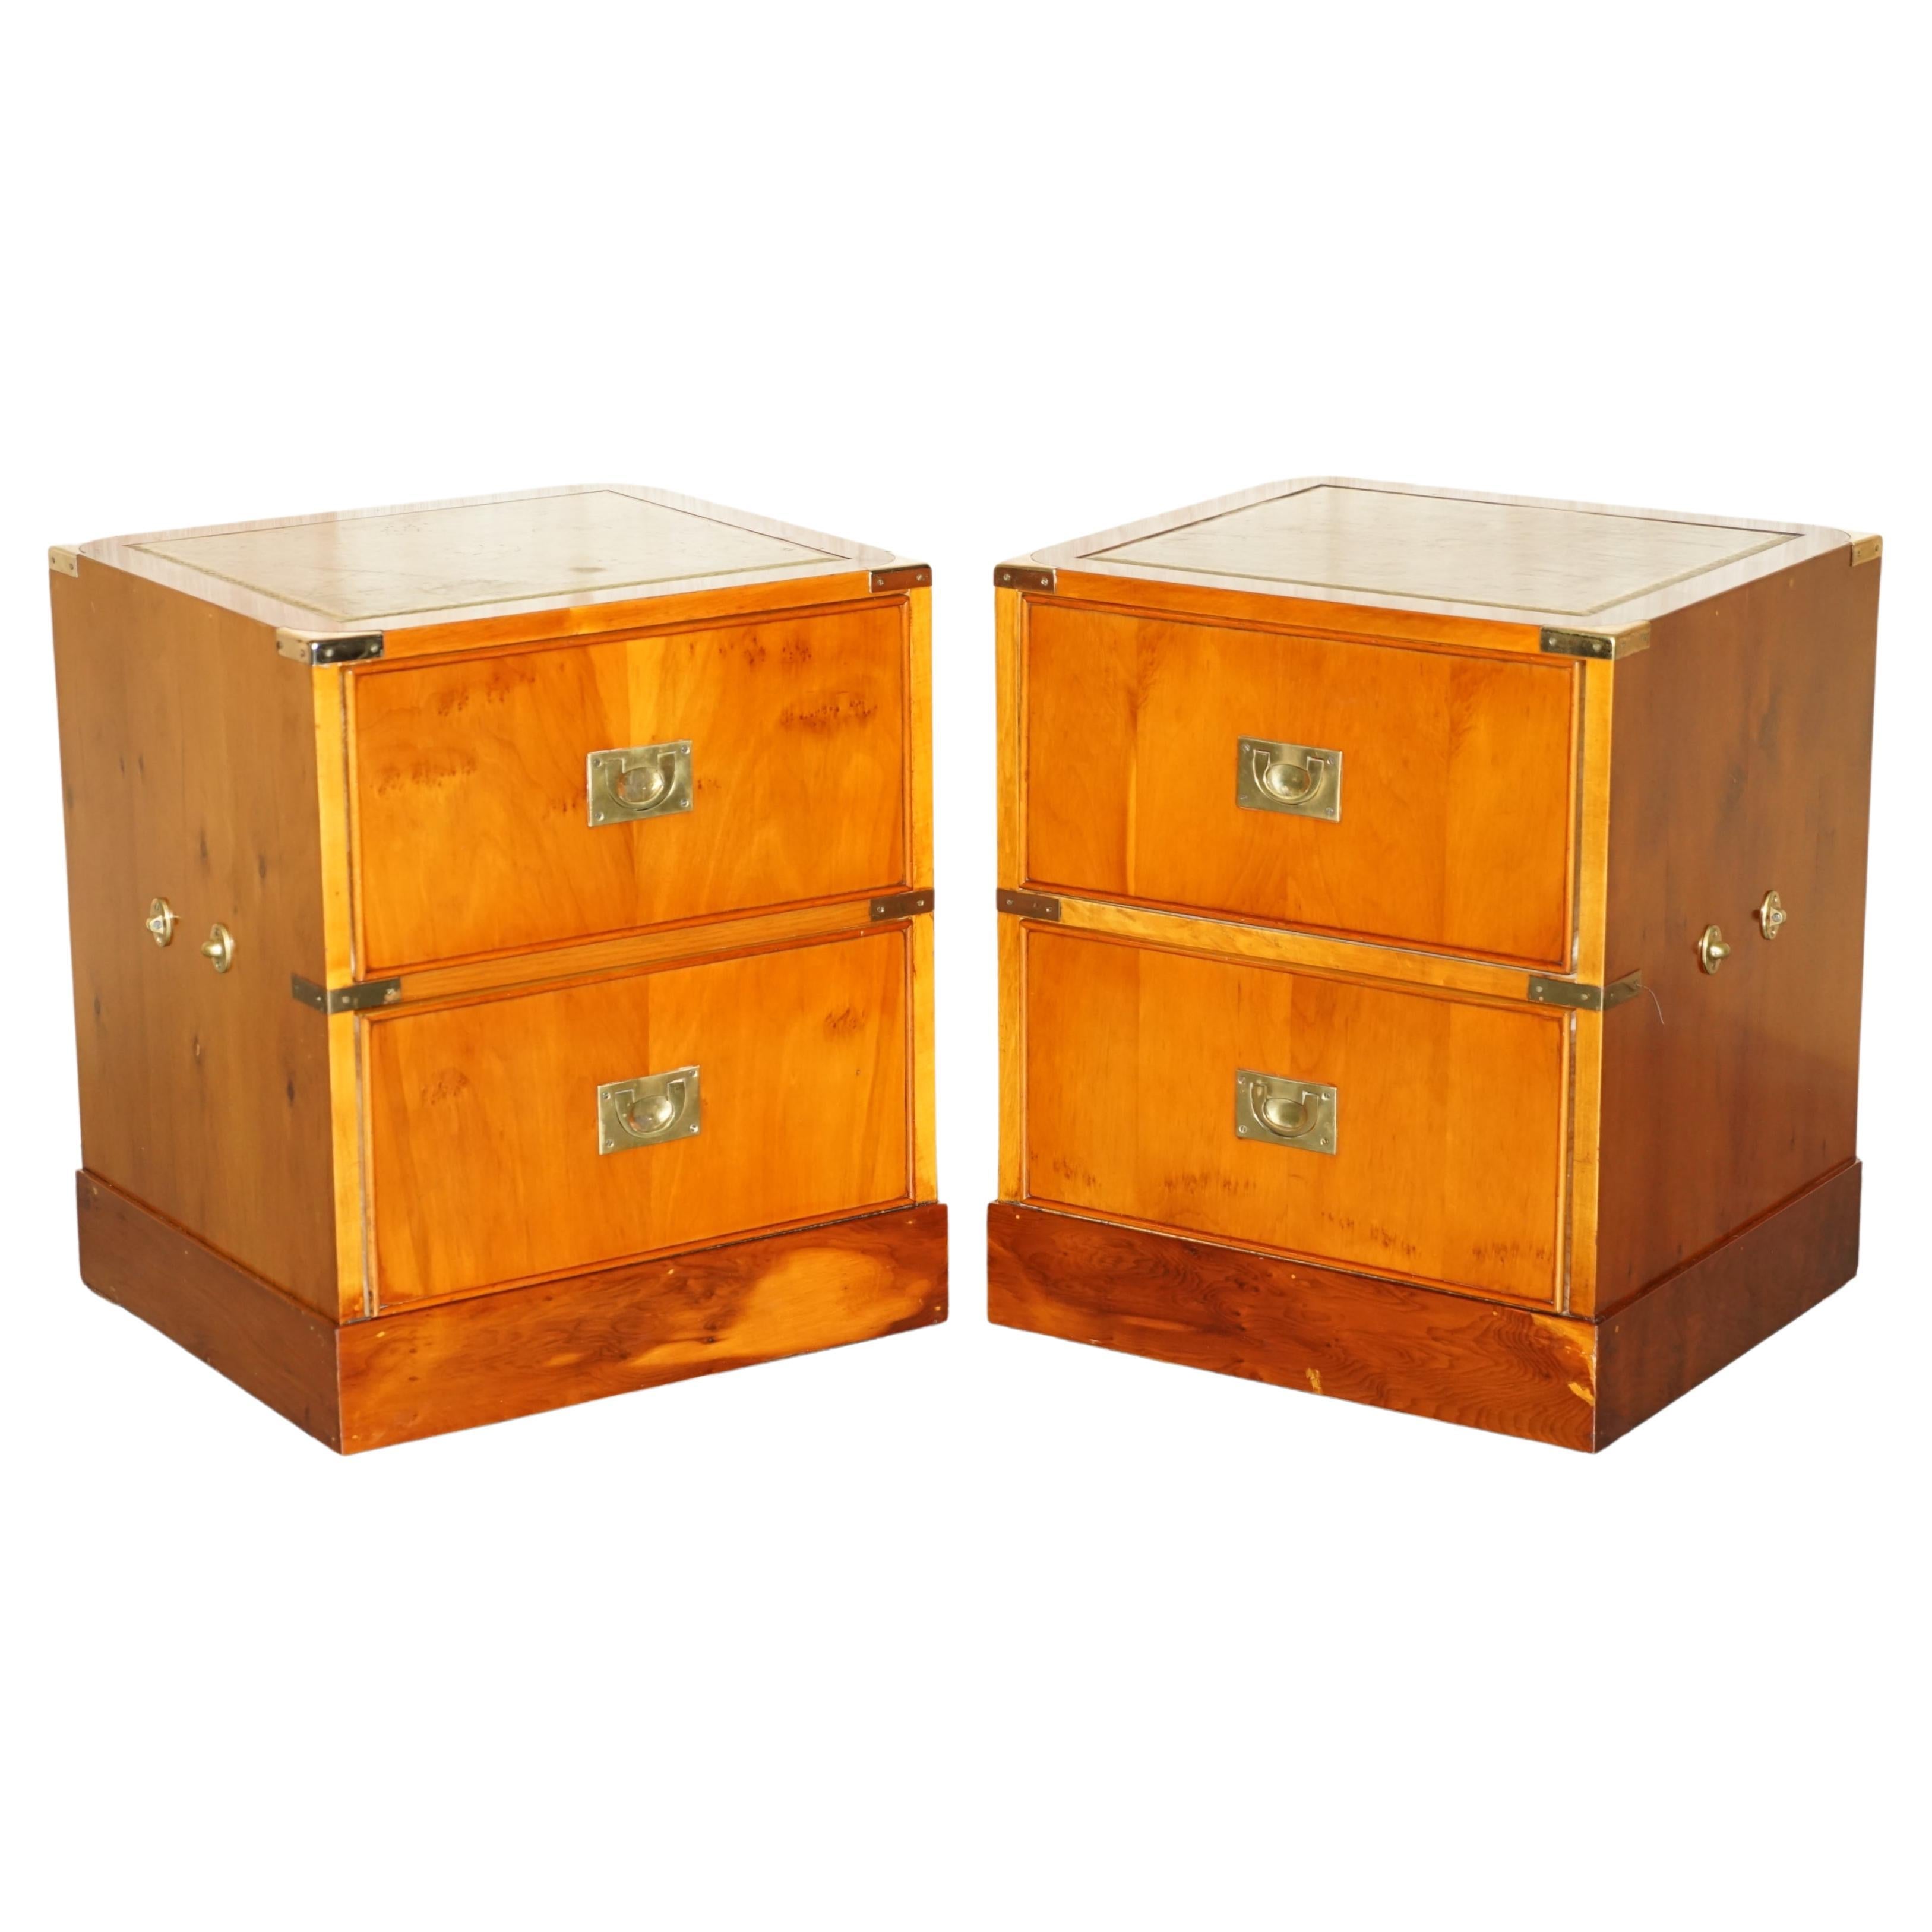 LOVELY PAiR OF BURR YEW WOOD GREEN LEATHER MILITARY CAMPAIGN NIGHTSTAND DRAWERS For Sale